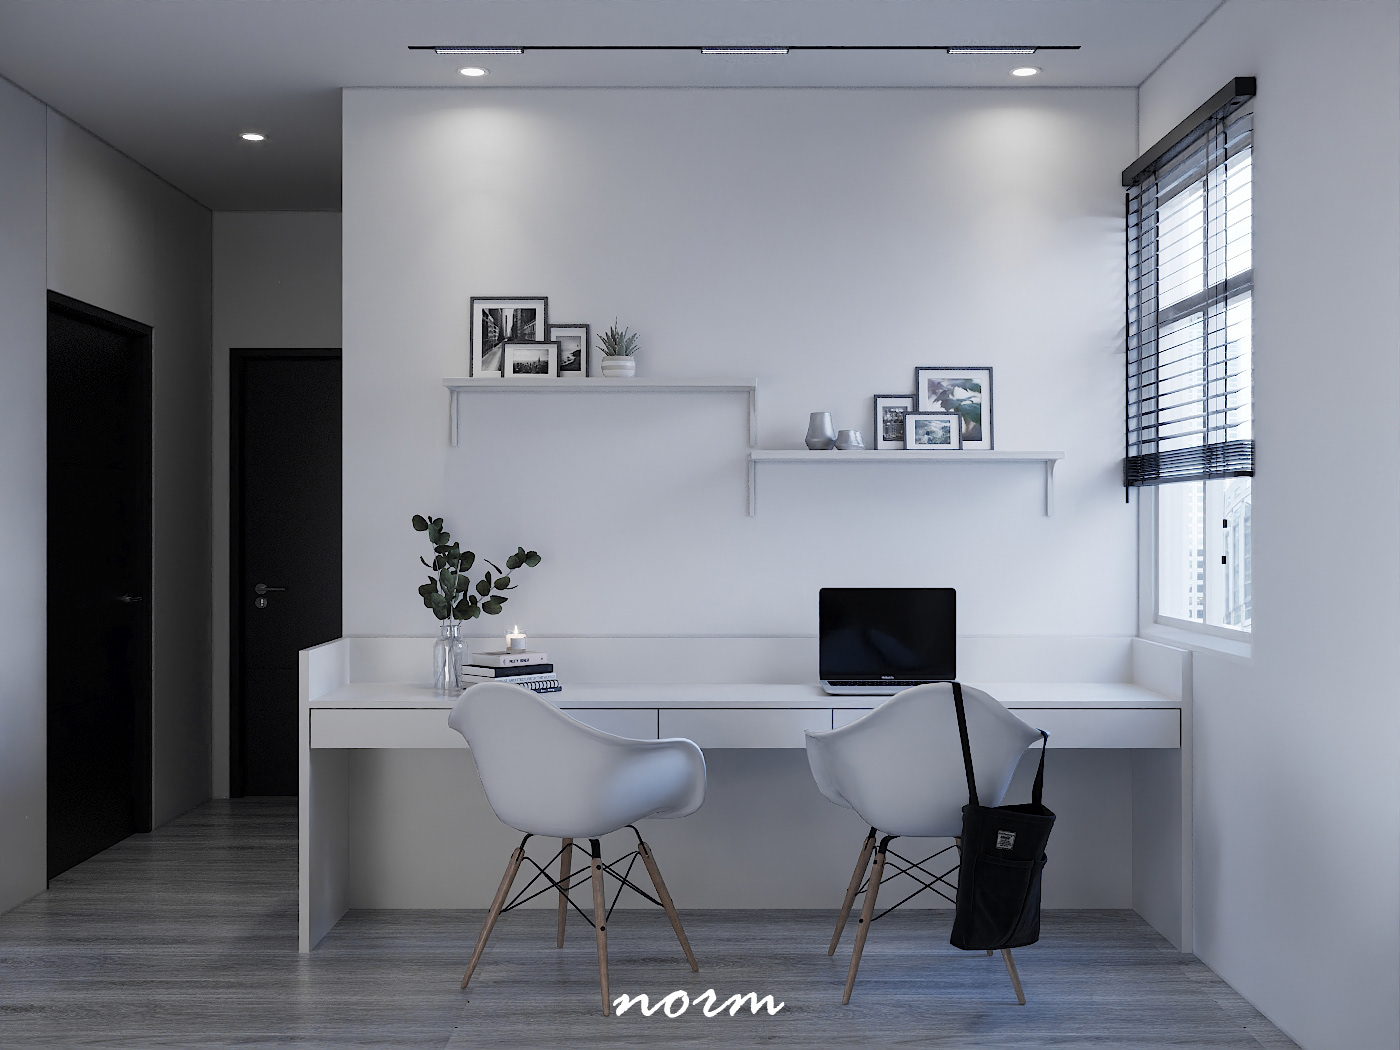 A working area behind the dining table features pure white walls with intertwined geometric lines that highlight the bright and fresh window shape. At the same time, it establishes a comprehensive link of learning and working environment for both parents and children.